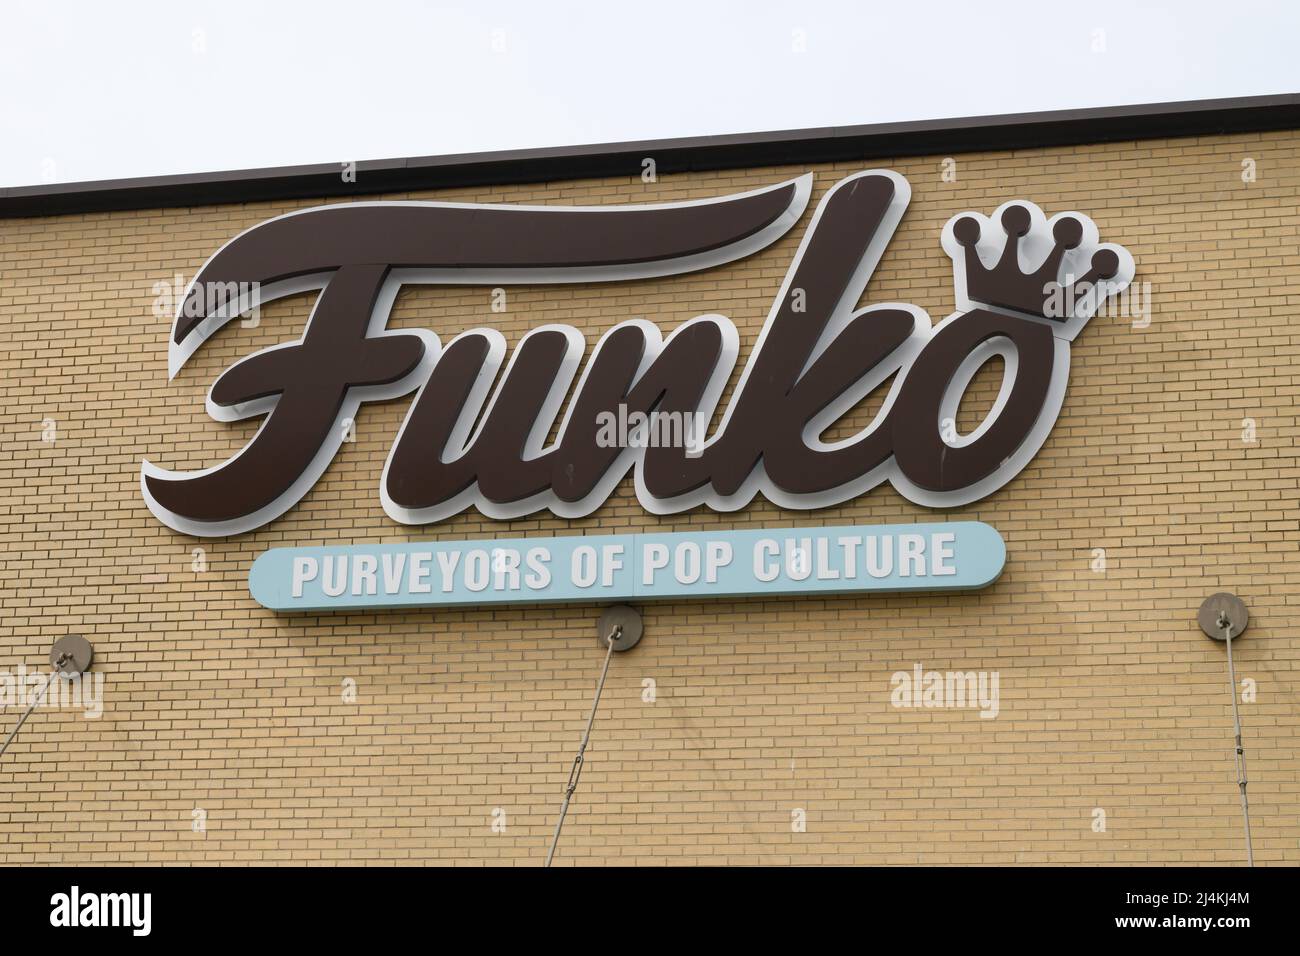 Everett, WA, USA - April 12, 2022; Sign for Funko, Purveyors of Pop Culture and logo Stock Photo